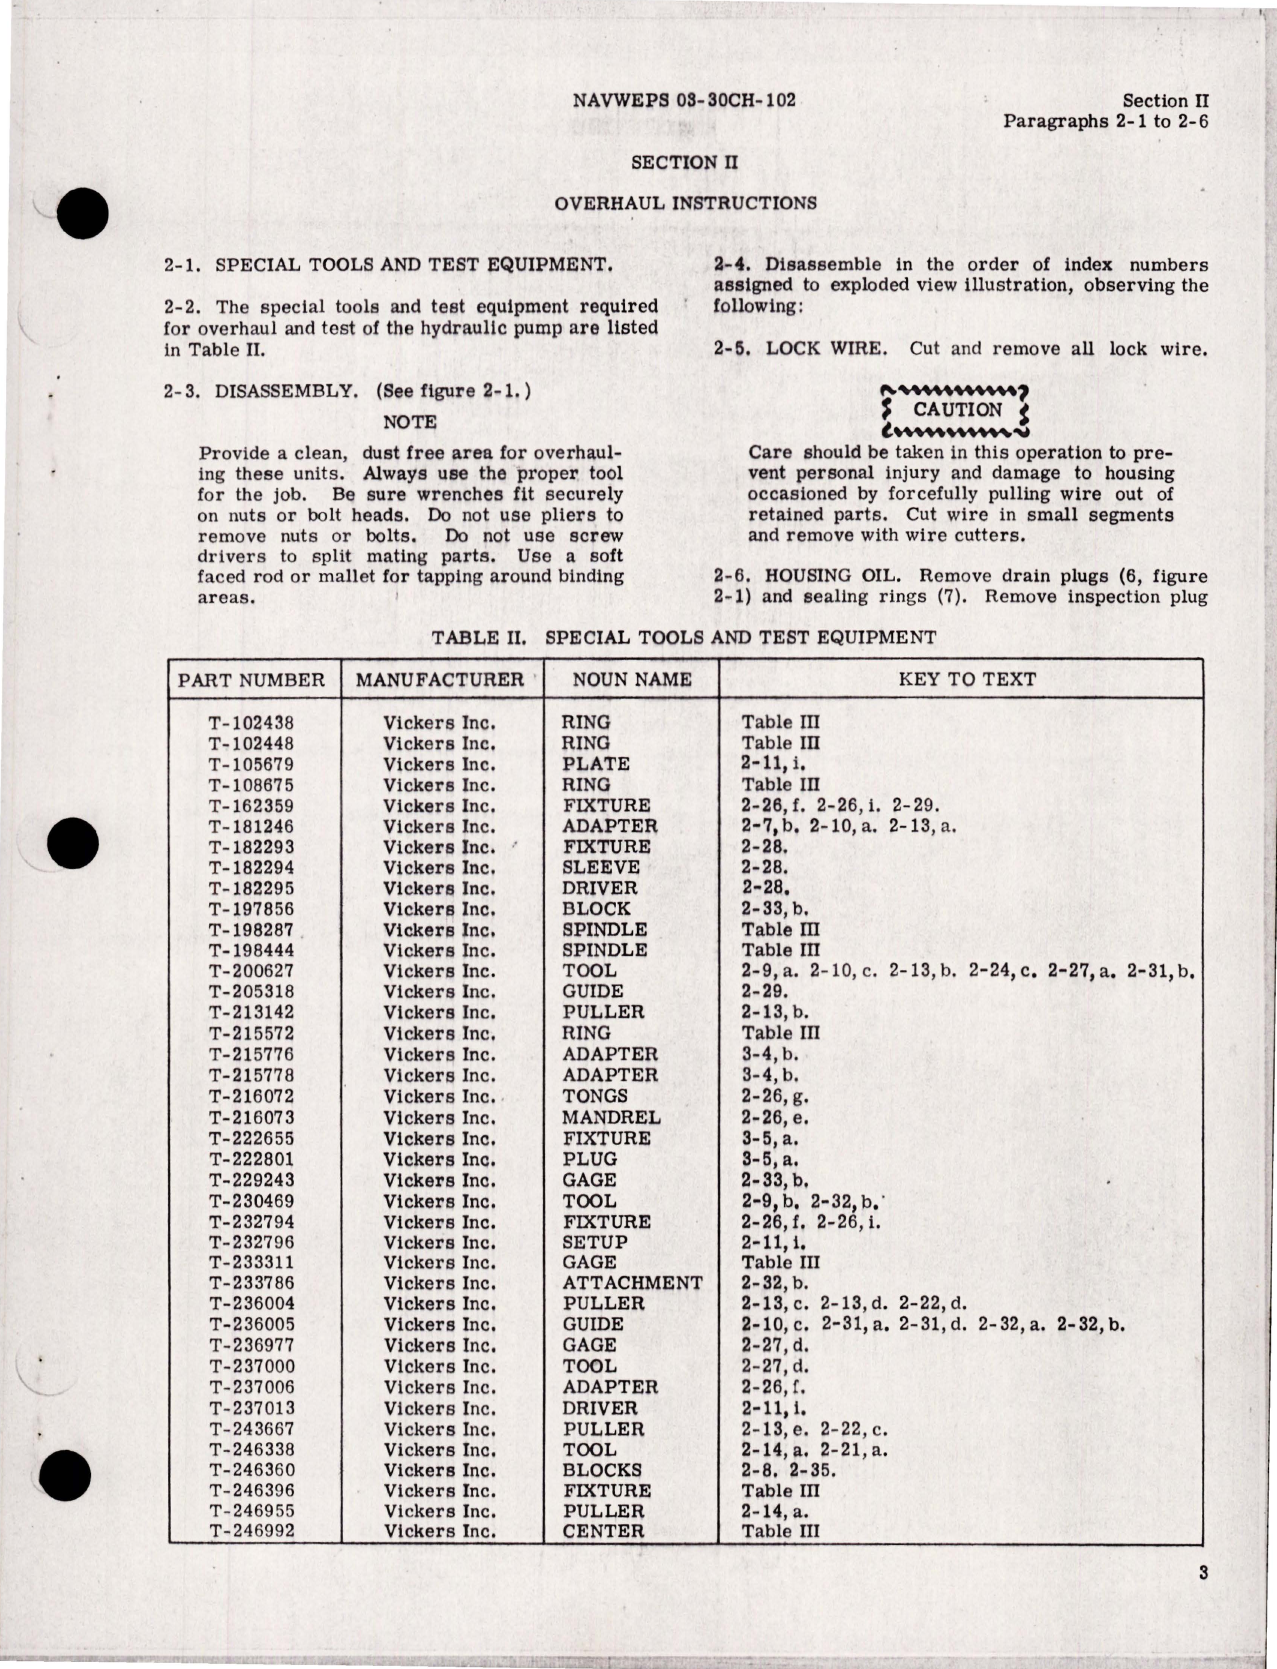 Sample page 5 from AirCorps Library document: Overhaul Instructions for Hydraulic Pump Assembly